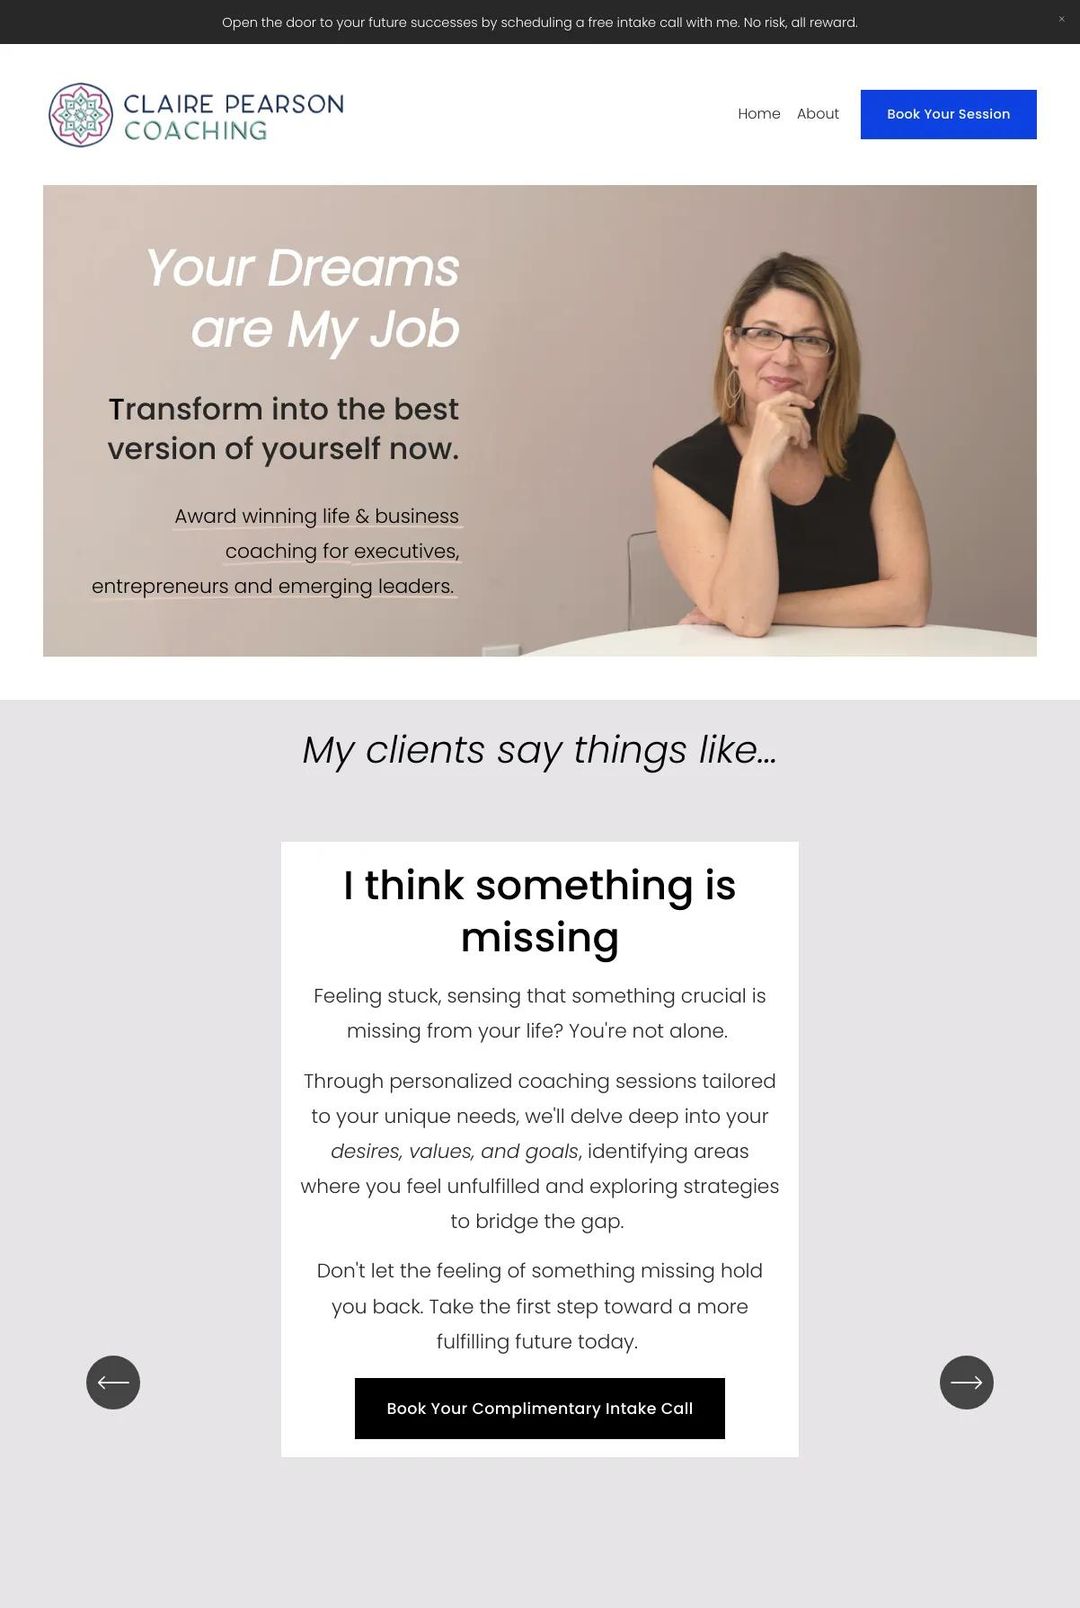 Screenshot 1 of Claire Pearson Coaching (Example Squarespace Coach Website)